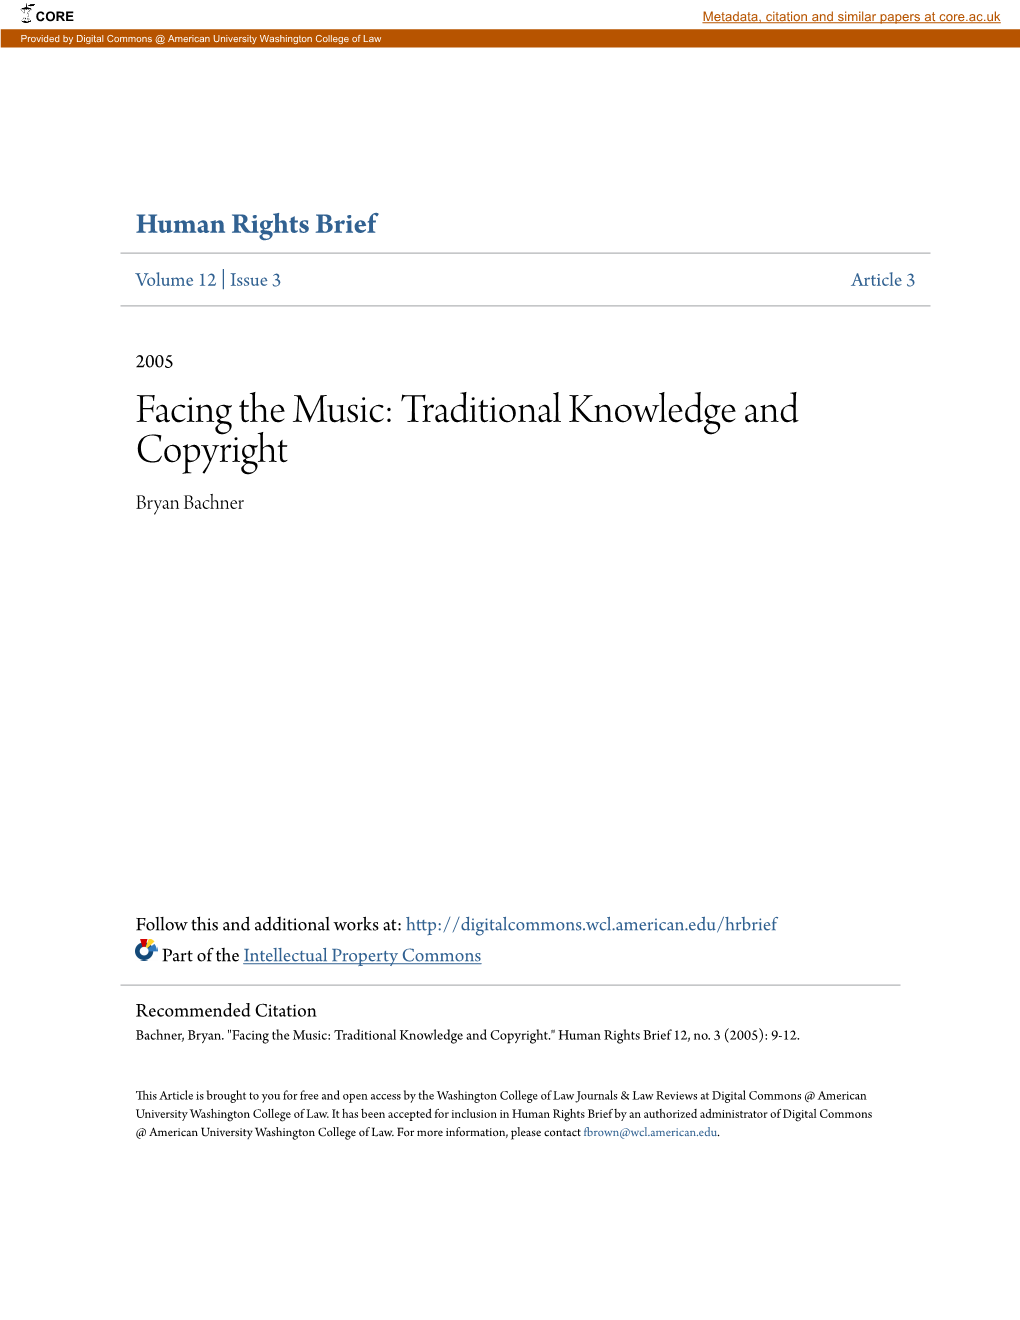 Facing the Music: Traditional Knowledge and Copyright Bryan Bachner